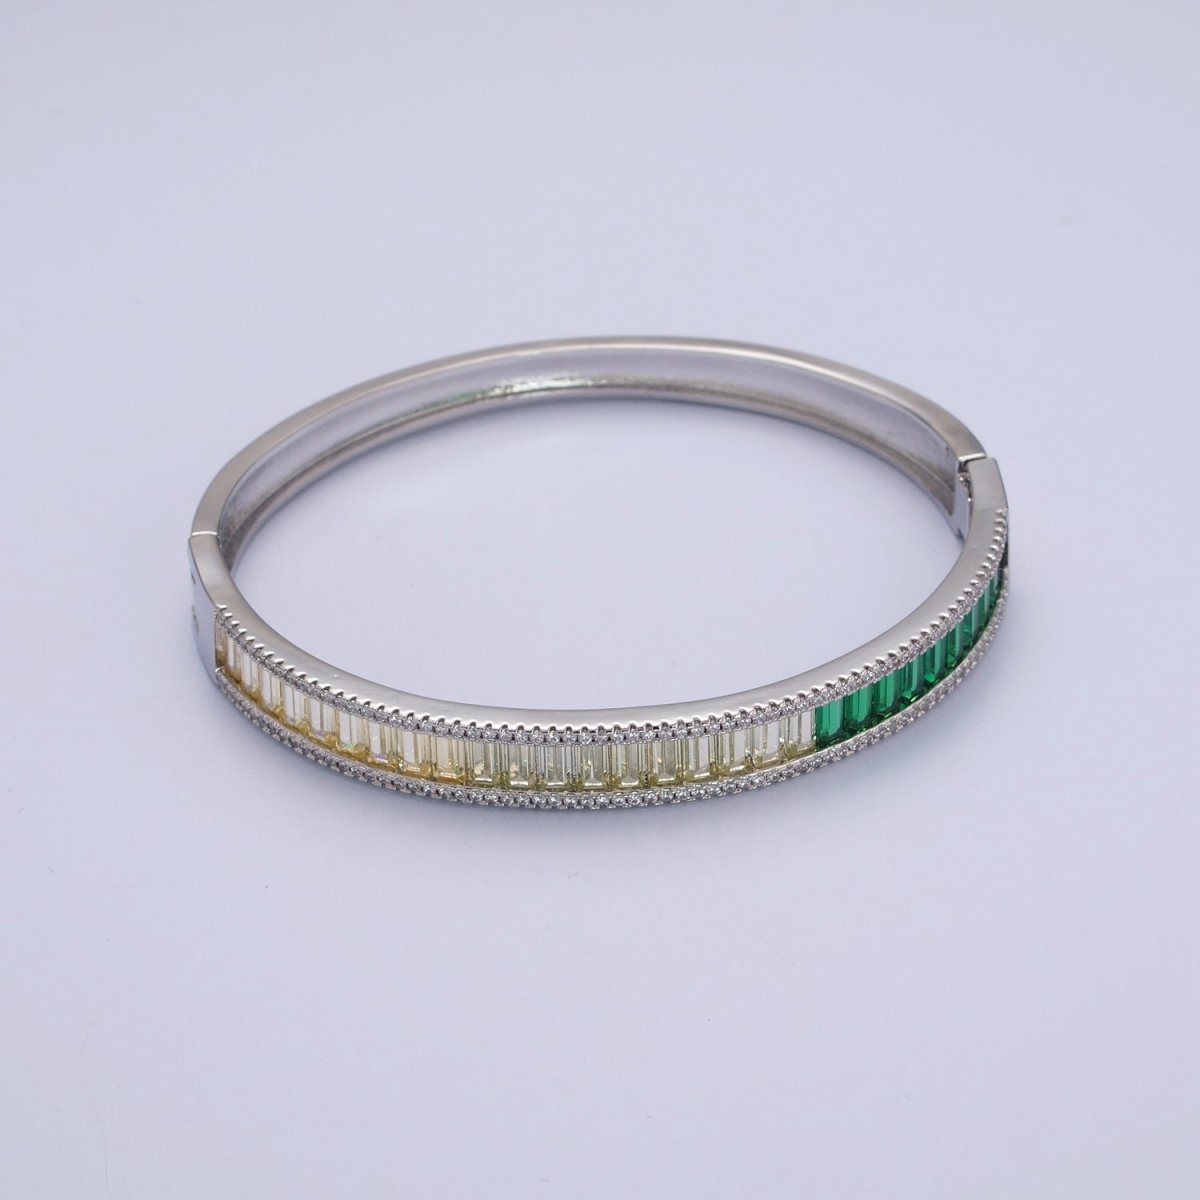 24K Gold Filled Micro Pave Gradient Green Baguette Bangle Bracelet | WA-1012 WA-1013 Clearance Pricing - DLUXCA